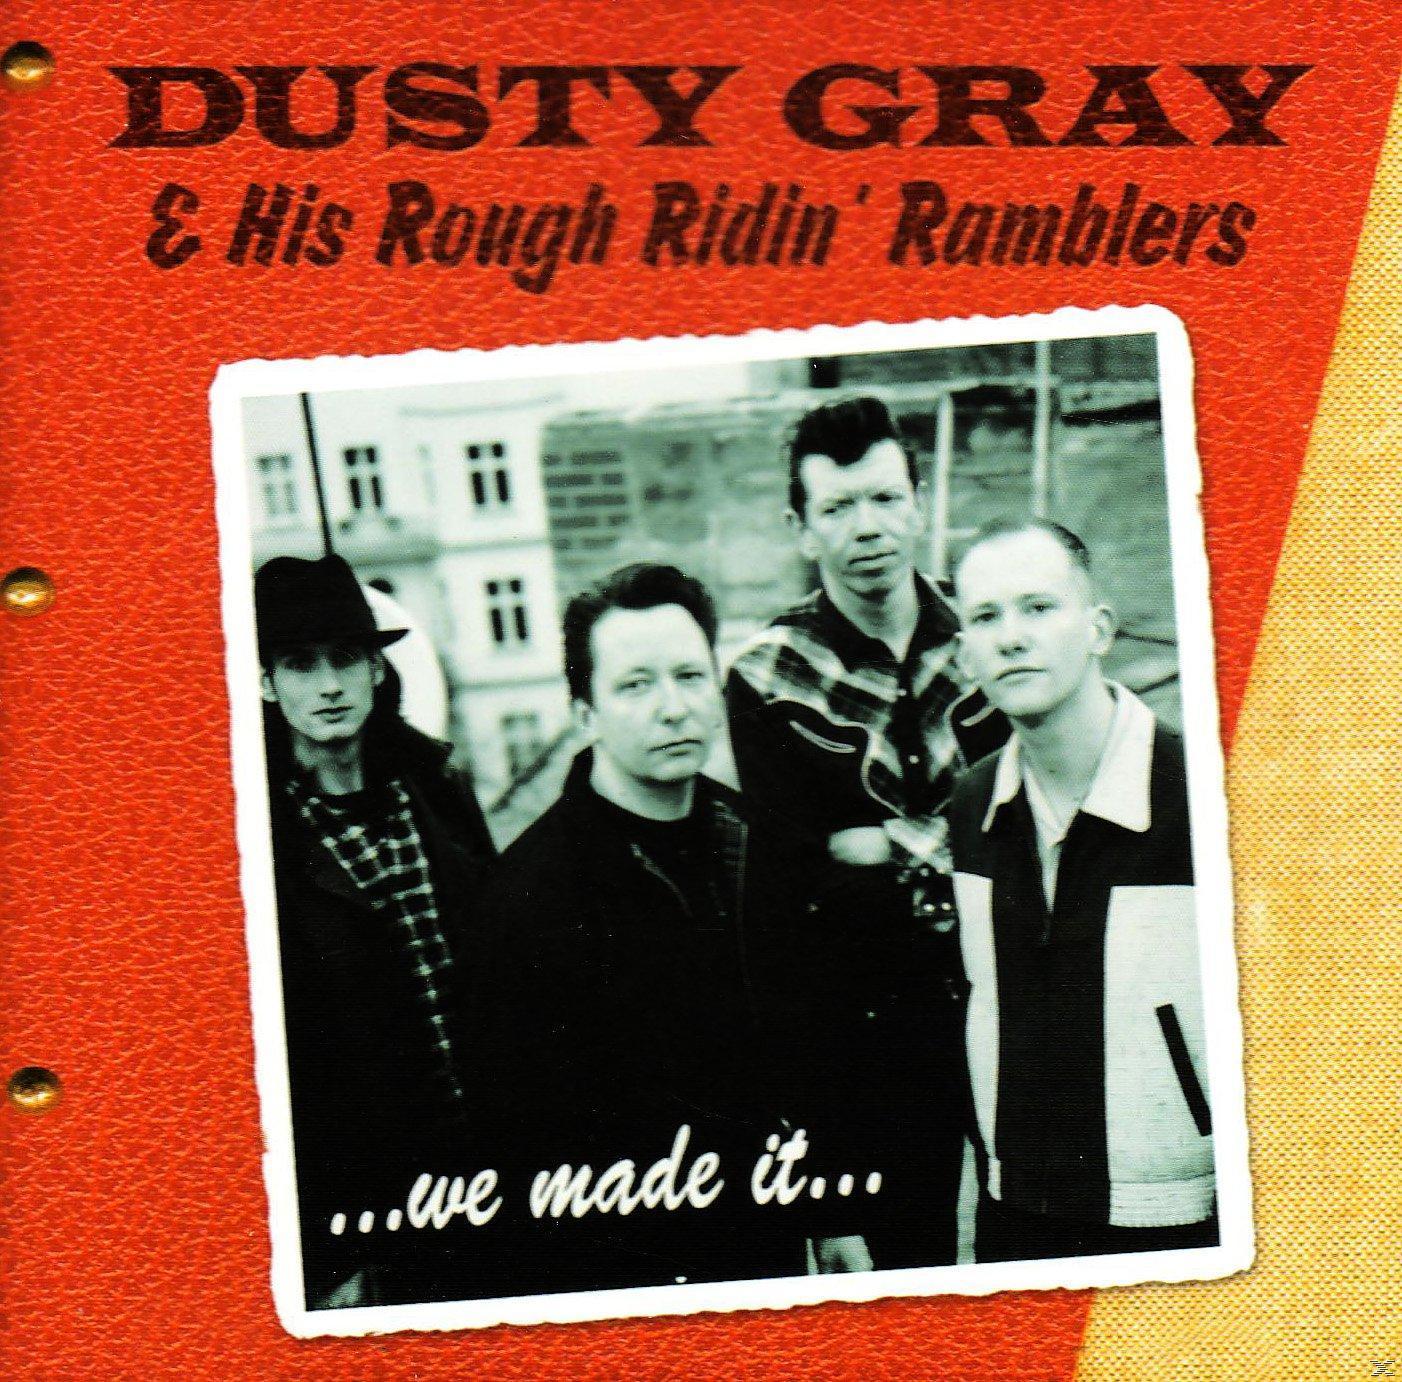 - His Ramblers Made (CD) - It Dusty-gray Rough Ridin\' & We